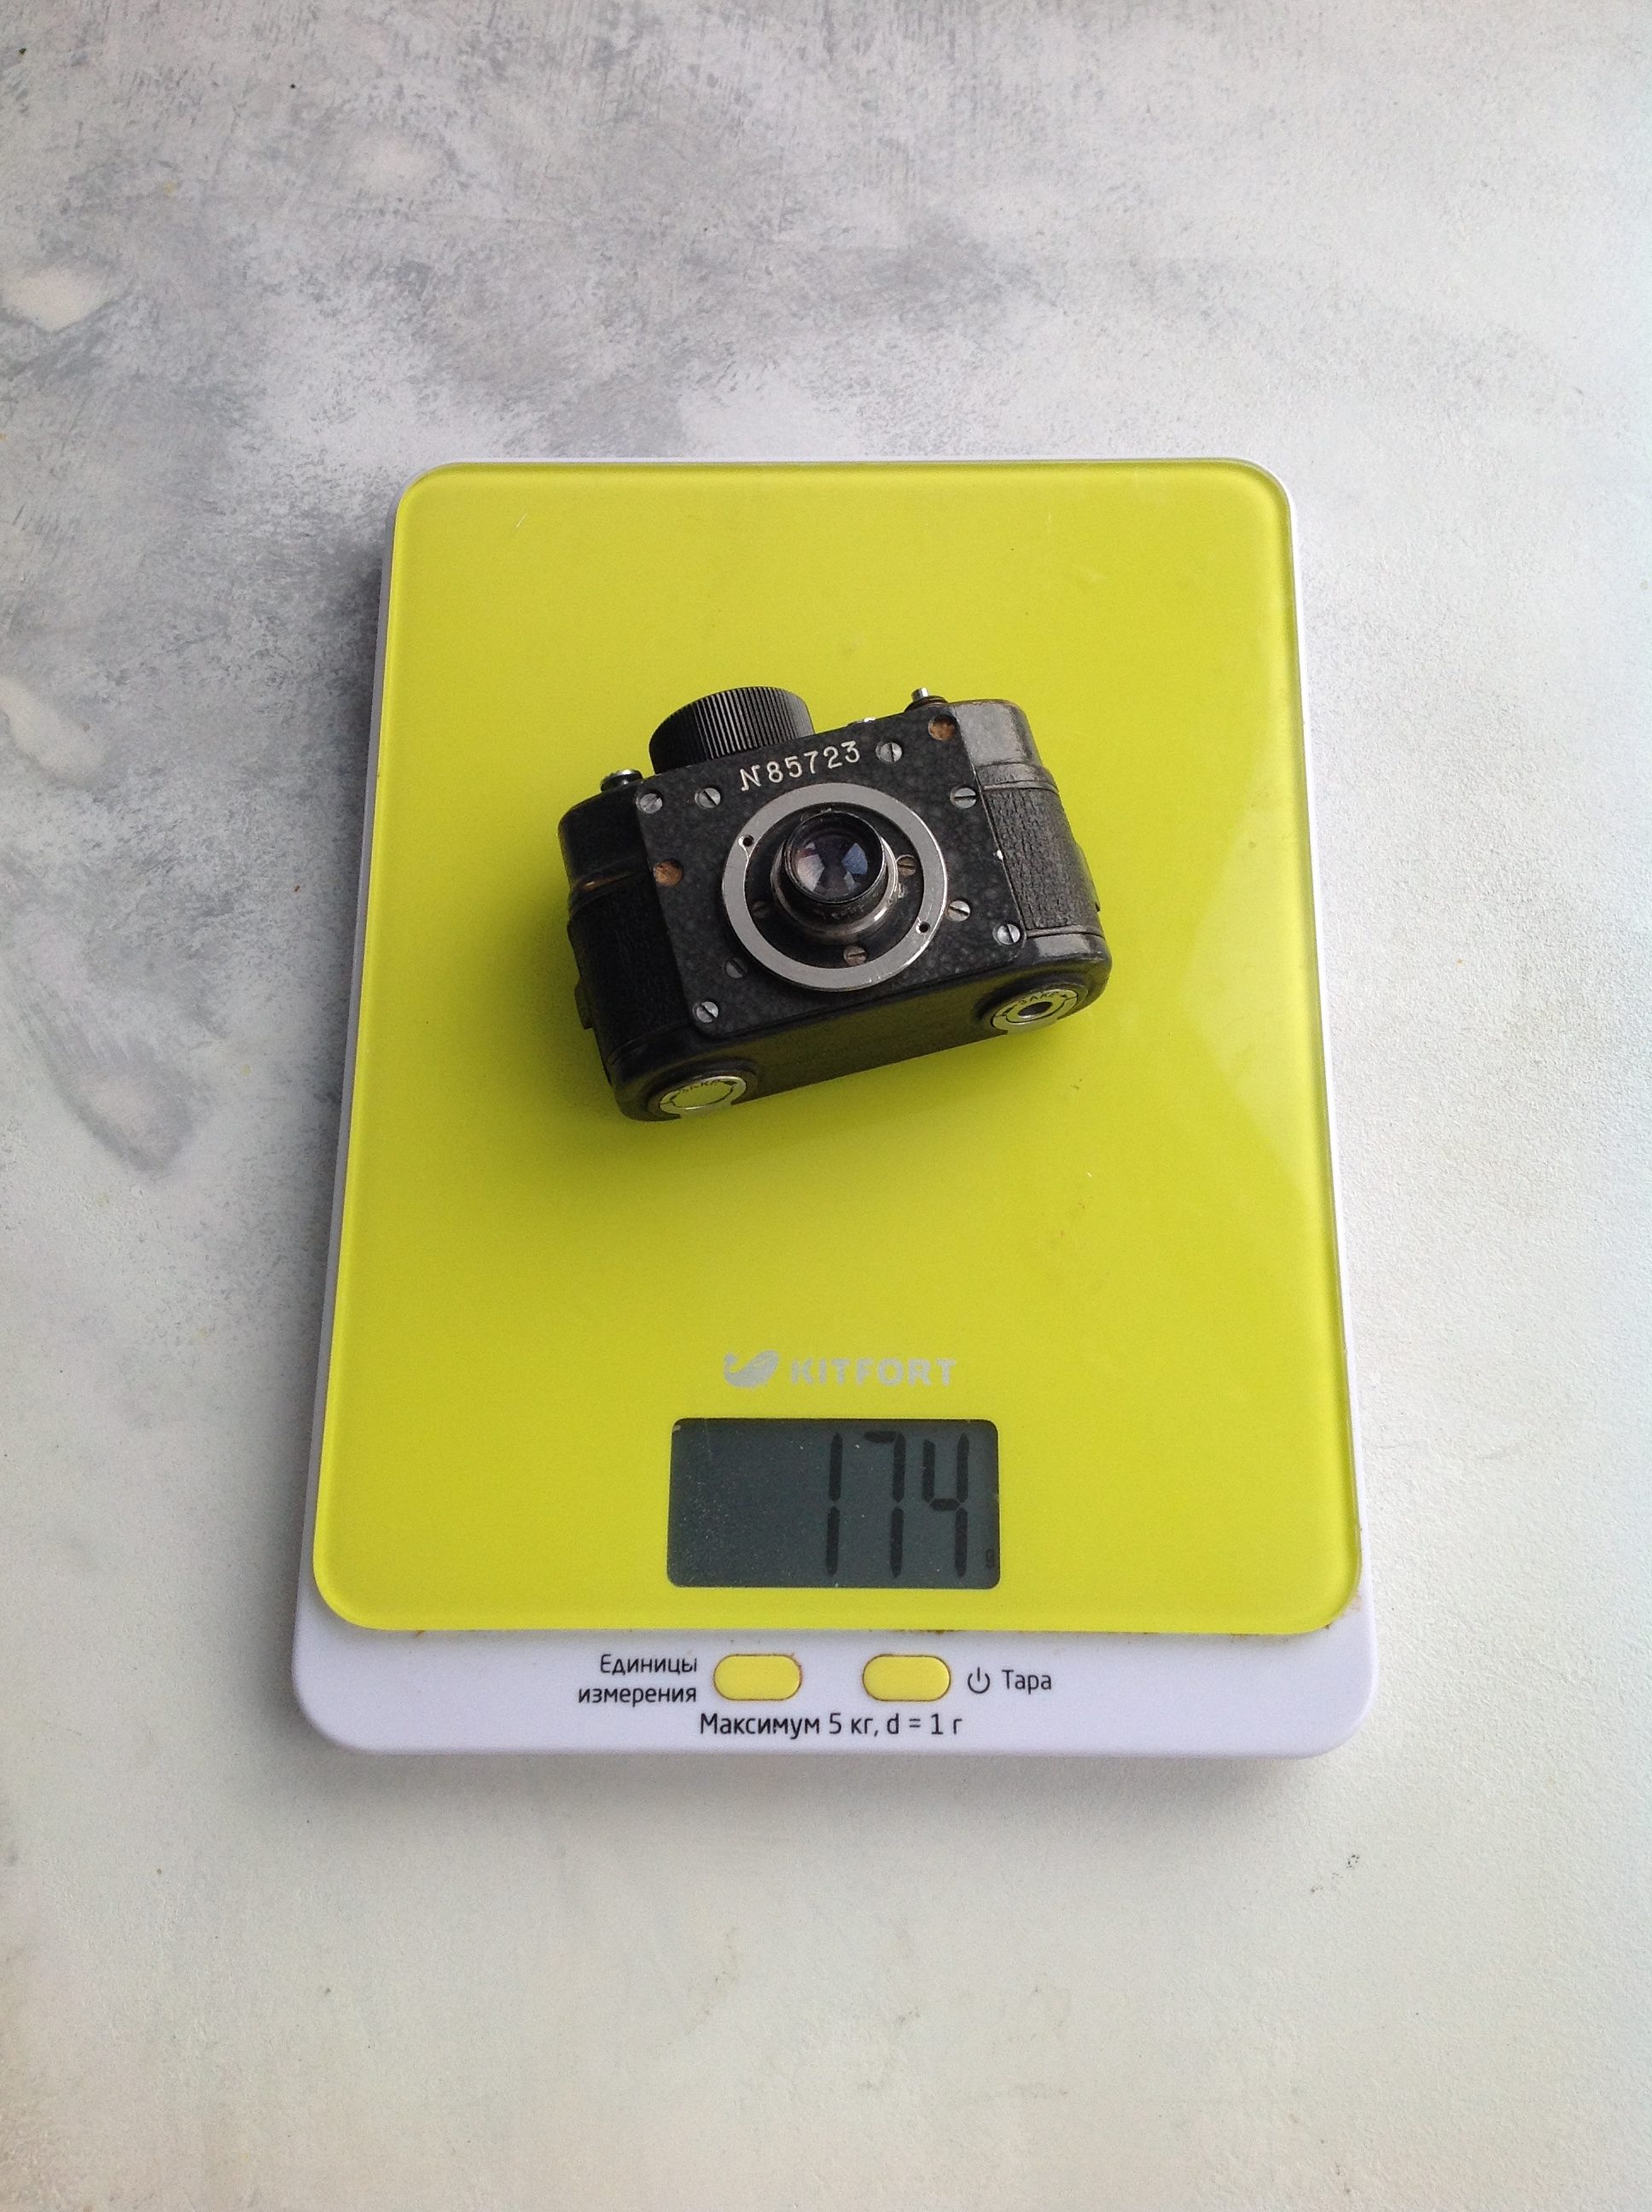 the weight of a small spy camera